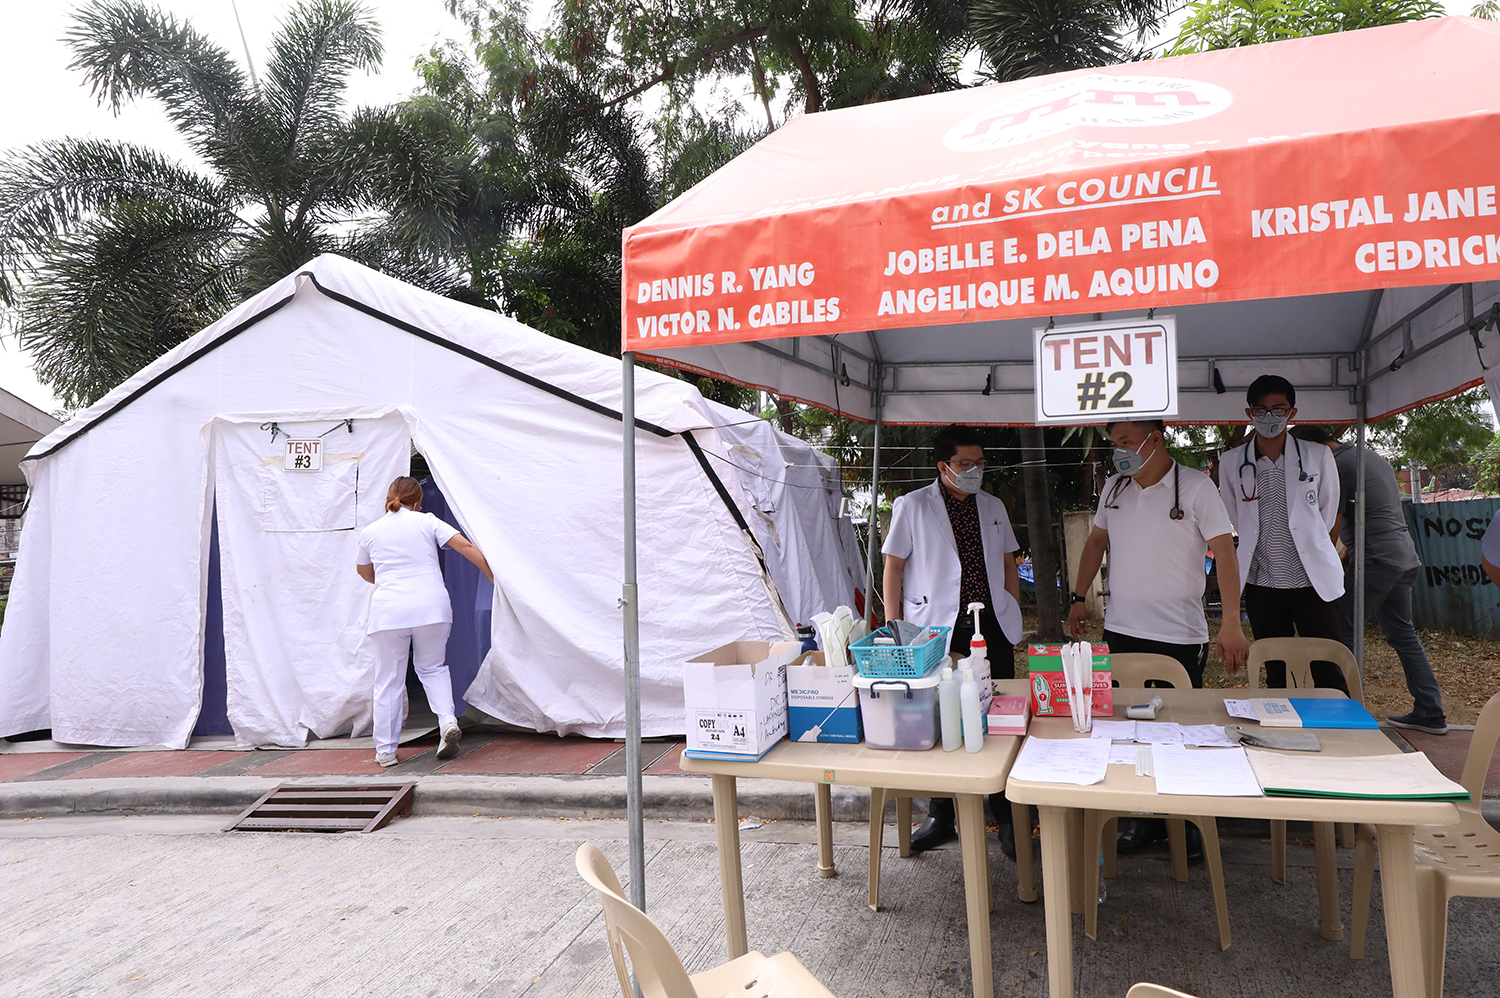 QUEZON CITY General Hospital health workers on Tuesday, March 10, 2020, prepare the isolation tent for persons under investigation for suspected coronavirus infection. Photo by Darren Langit/Rappler